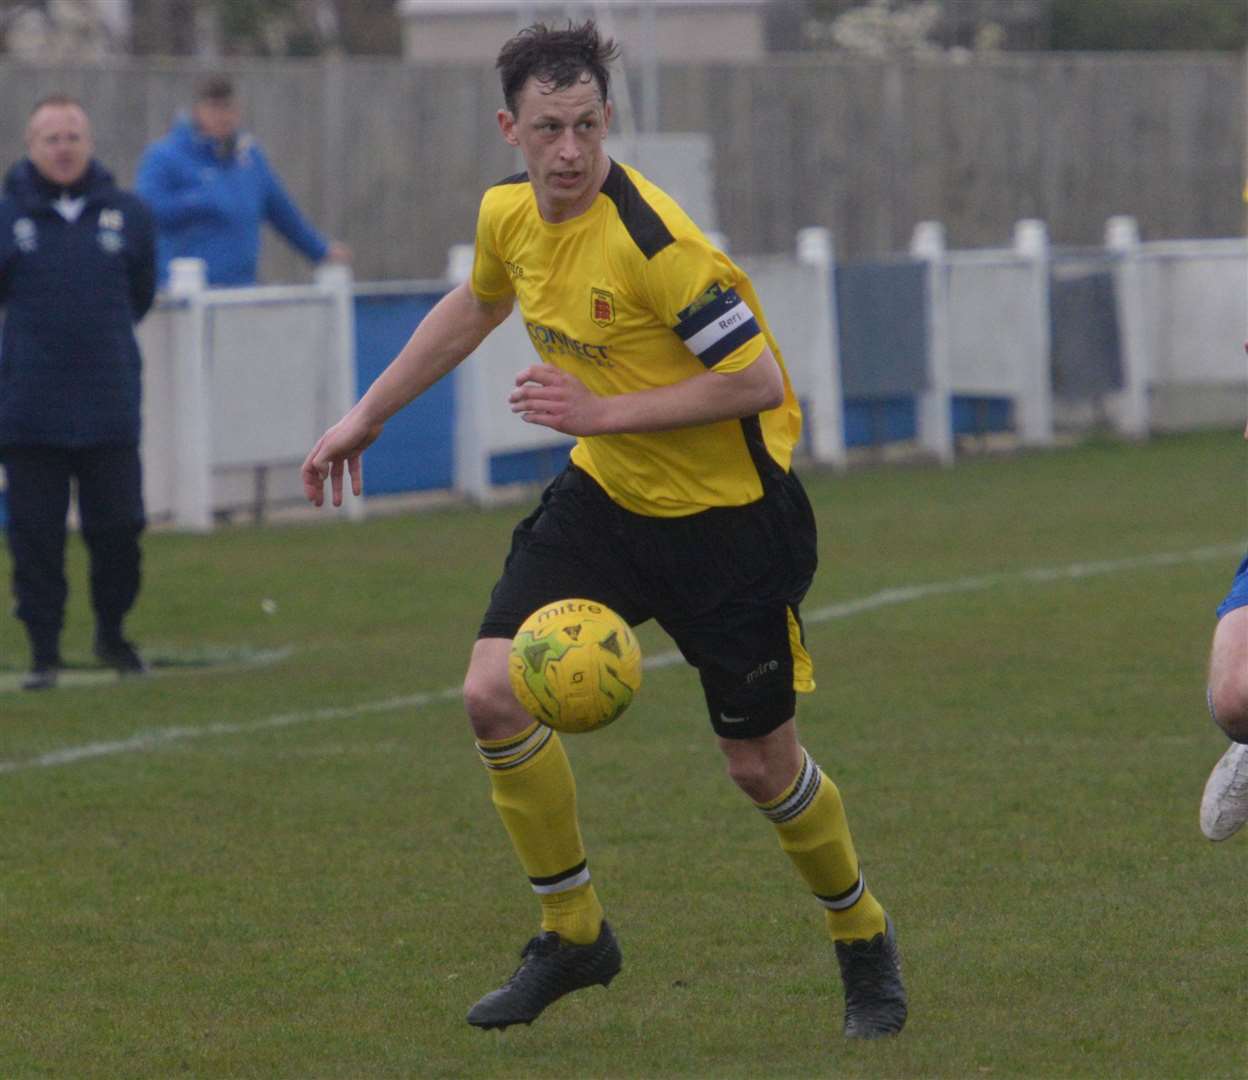 Popular Faversham centre-back Matt Bourne made his 450th club appearance in the draw with champions Hastings. Picture: Chris Davey